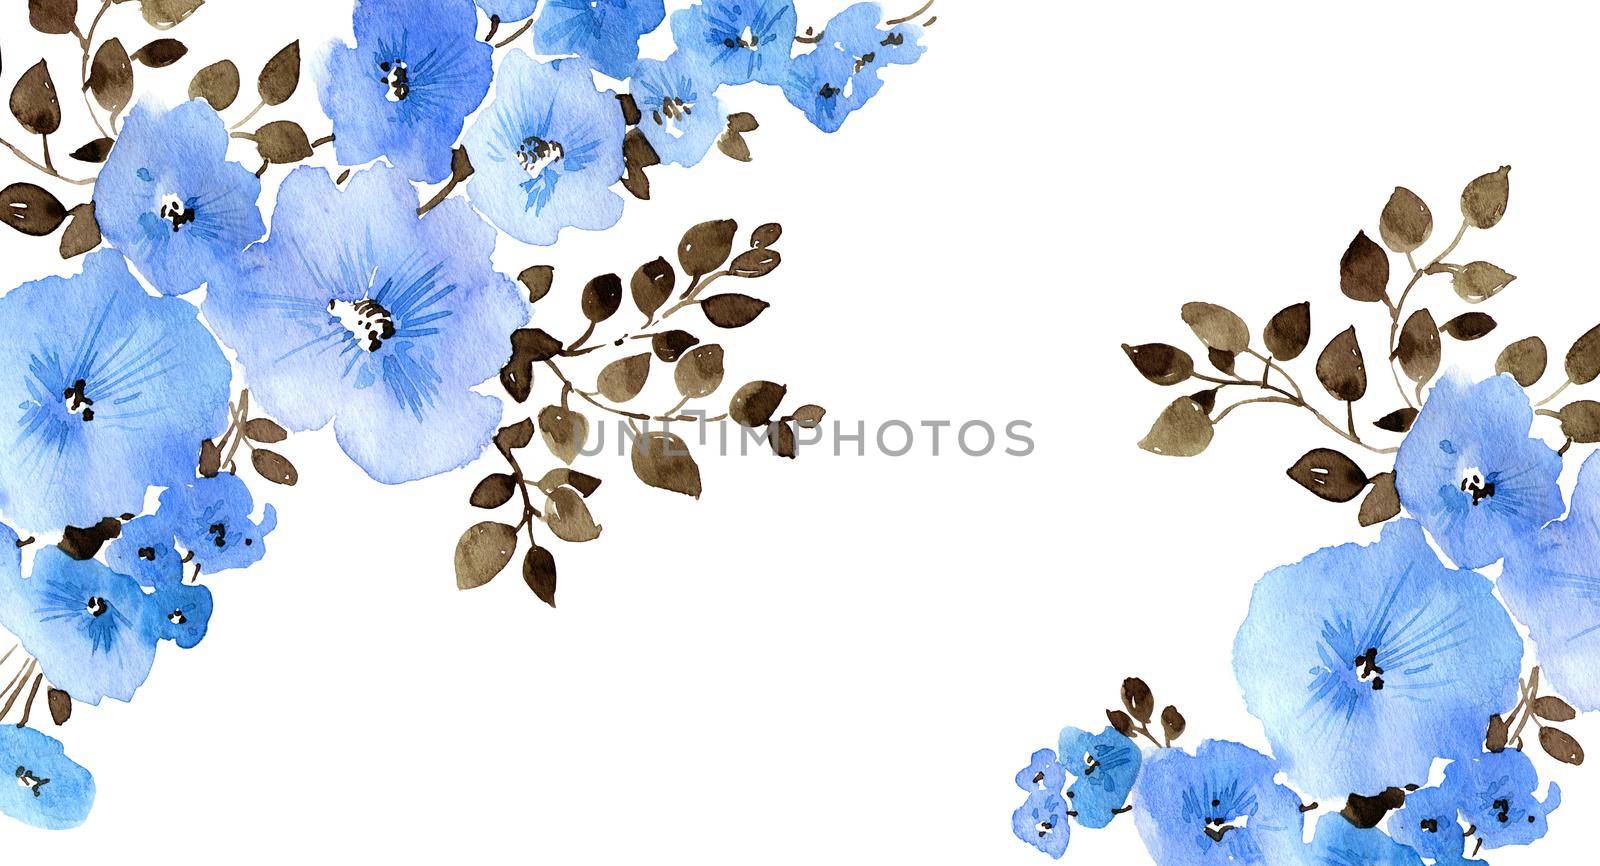 Watercolor illustration of blue flowers with leaves. Beautiful floral pattern on white background. Design for greeting card, invitation or cover.